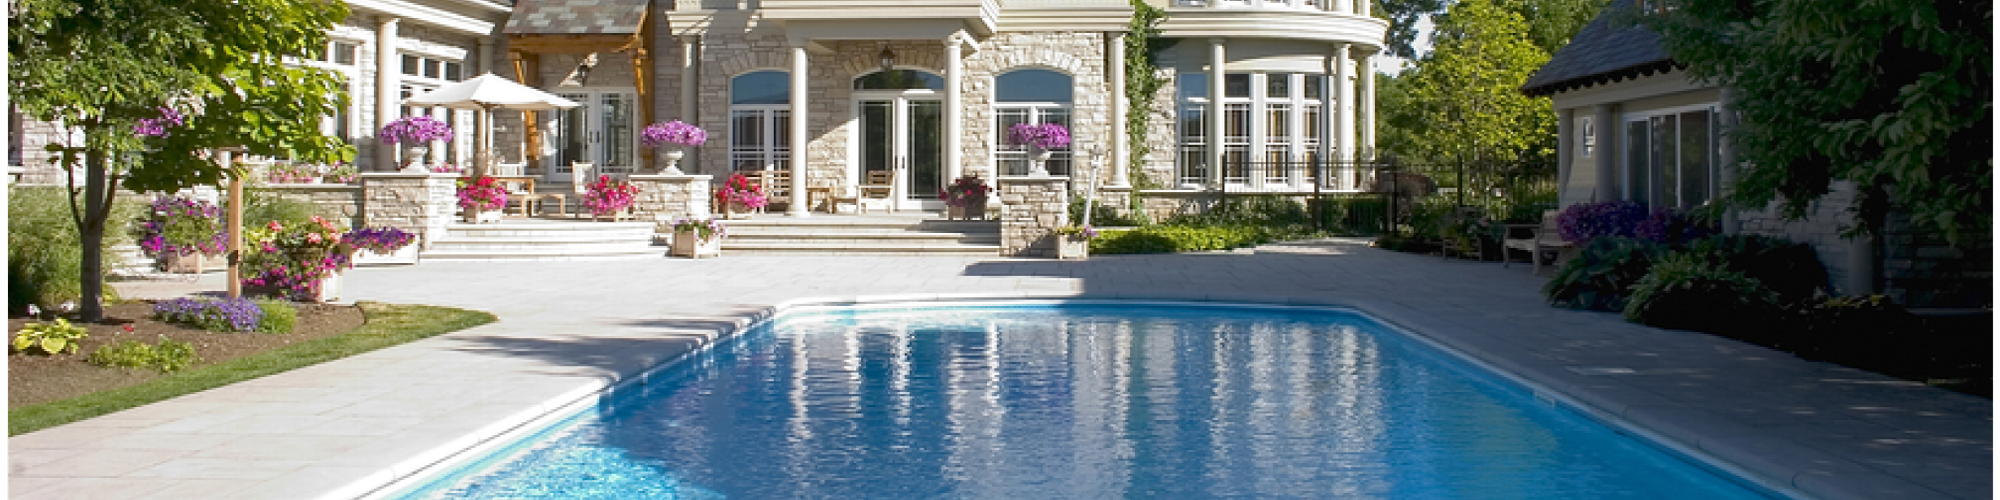 Elite Pool and Spa Service / Sales / Water Chemistry/Balance and Heaters and Filtration